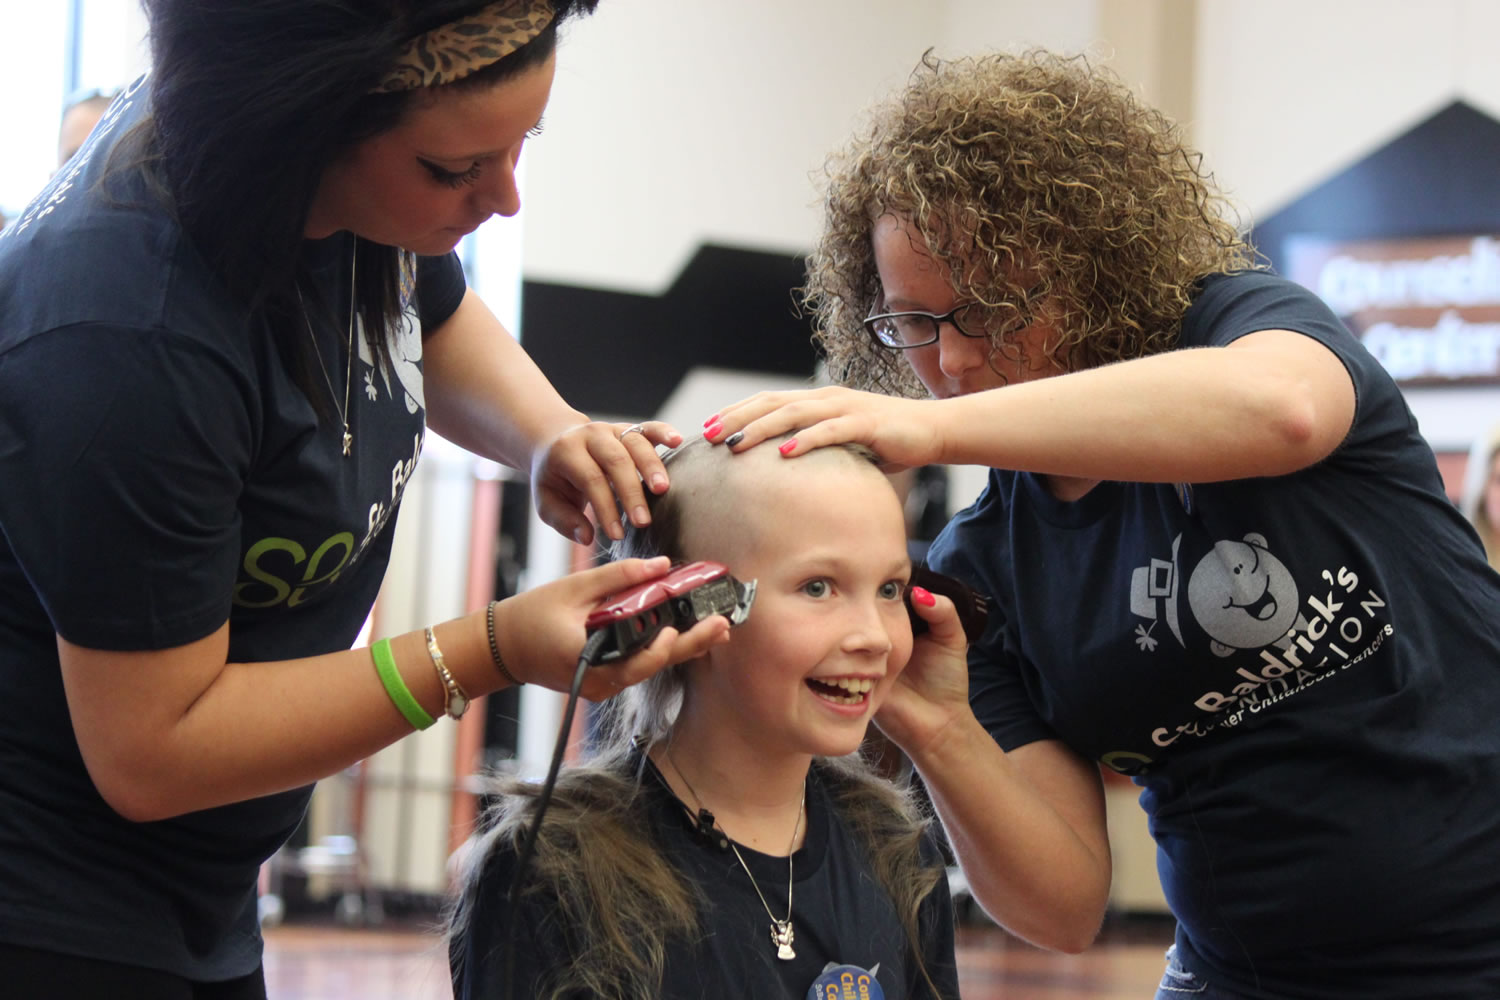 Washougal third-grader and cancer survivor Sammy Mederos reacts to getting her long locks of curly hair shaved off during a fundraiser for St. Baldrick's Foundation this afternoon at Washougal High School. Mederos was diagnosed with leukemia when she was in kindergarten. Mederos and her family helped organize the event, which included participation by Washougal Mayor Sean Guard and Cape Horn-Skye Elementary School secretary Mary La France--a breast cancer survivor.